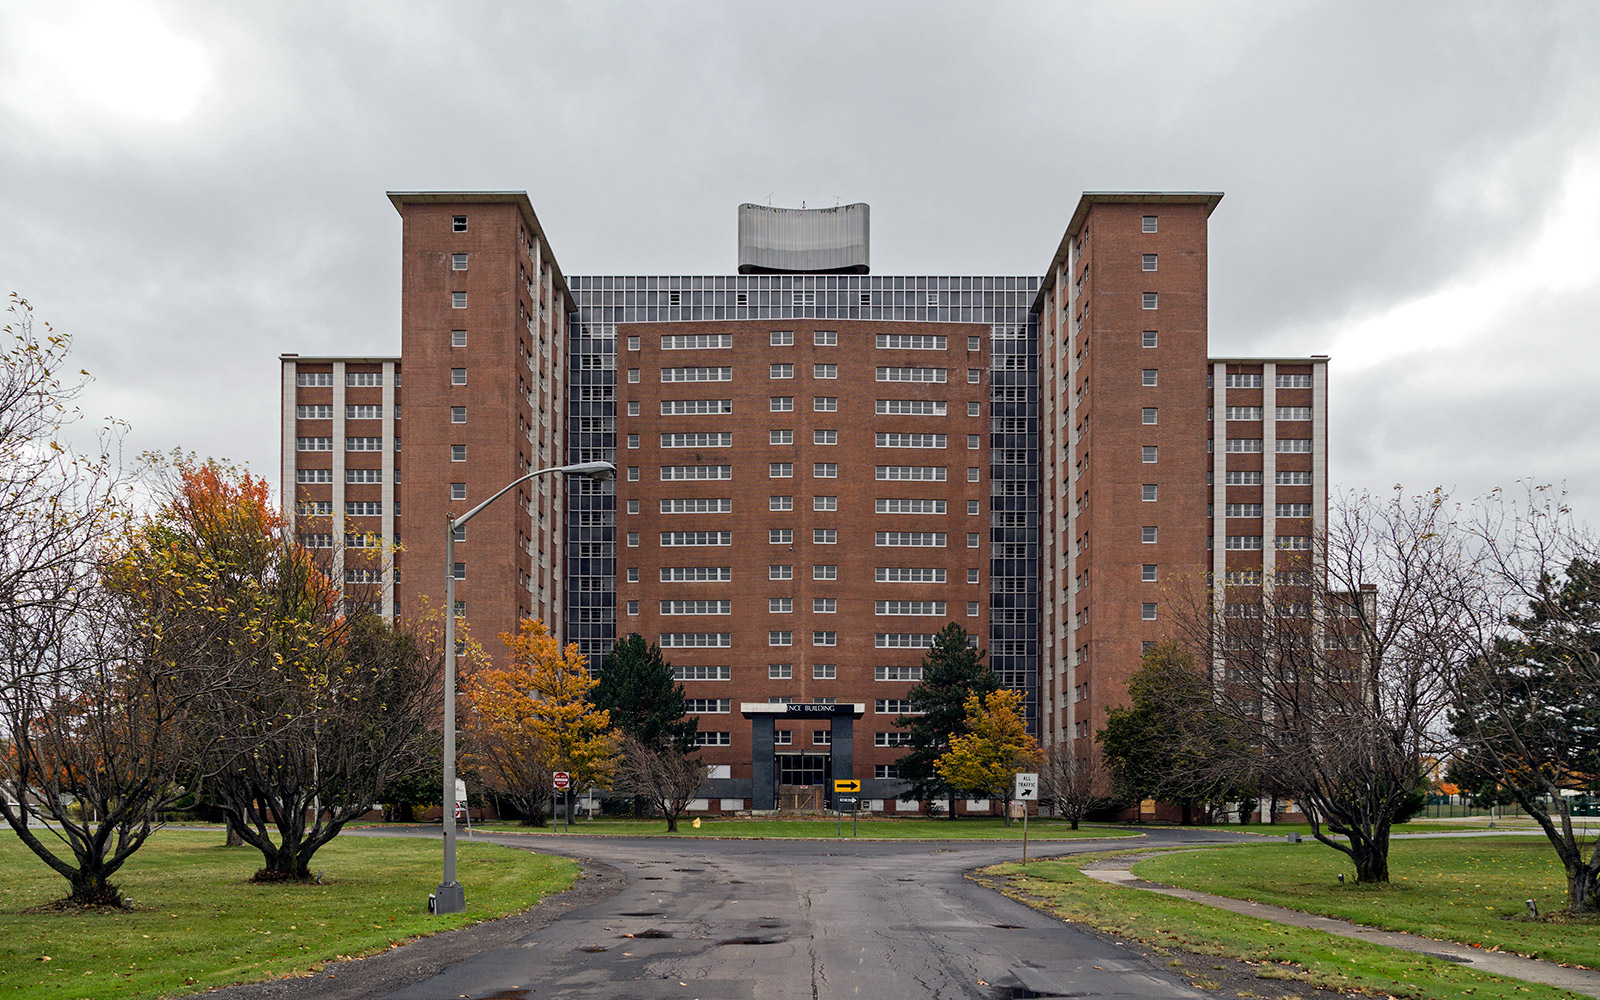 20141104. The abandoned modernist Terrence Building at Rochester